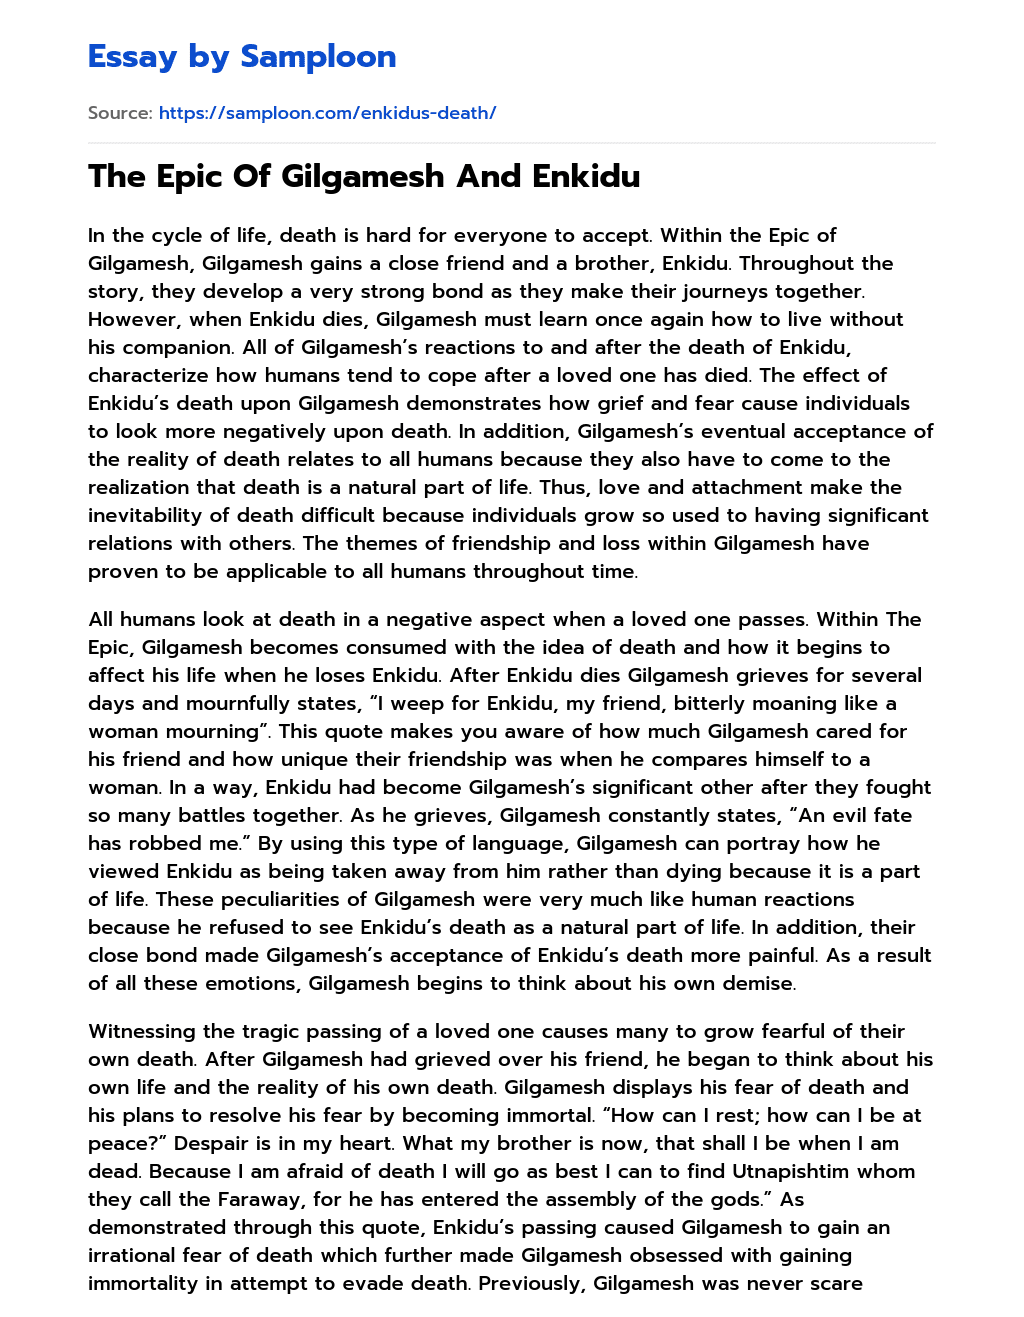 The Epic Of Gilgamesh And Enkidu essay